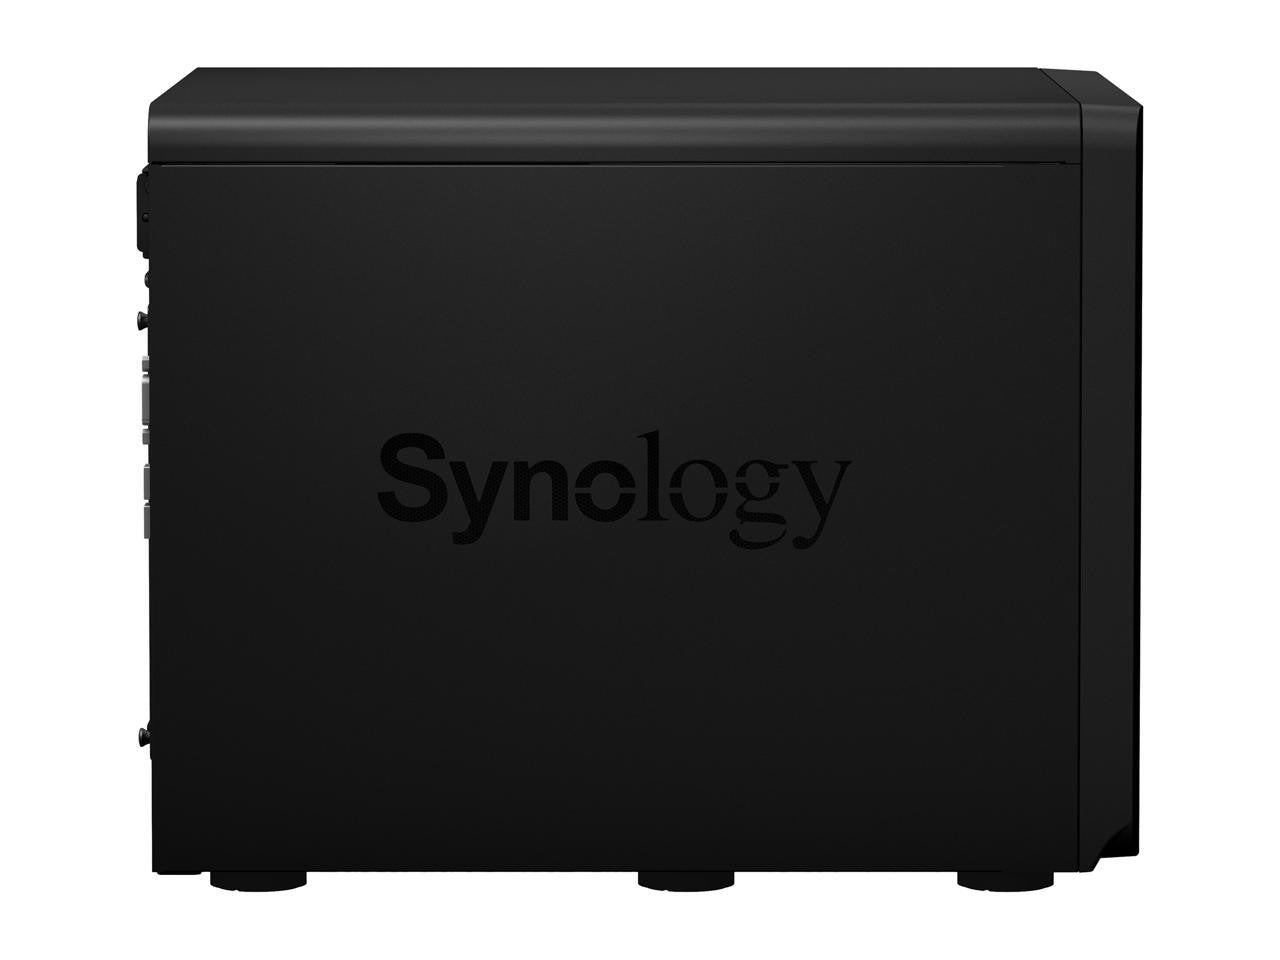 DS3622xs+ 12-BAY DiskStation with 16GB RAM and 216TB (12 x 18TB) of Synology Enterprise Drives